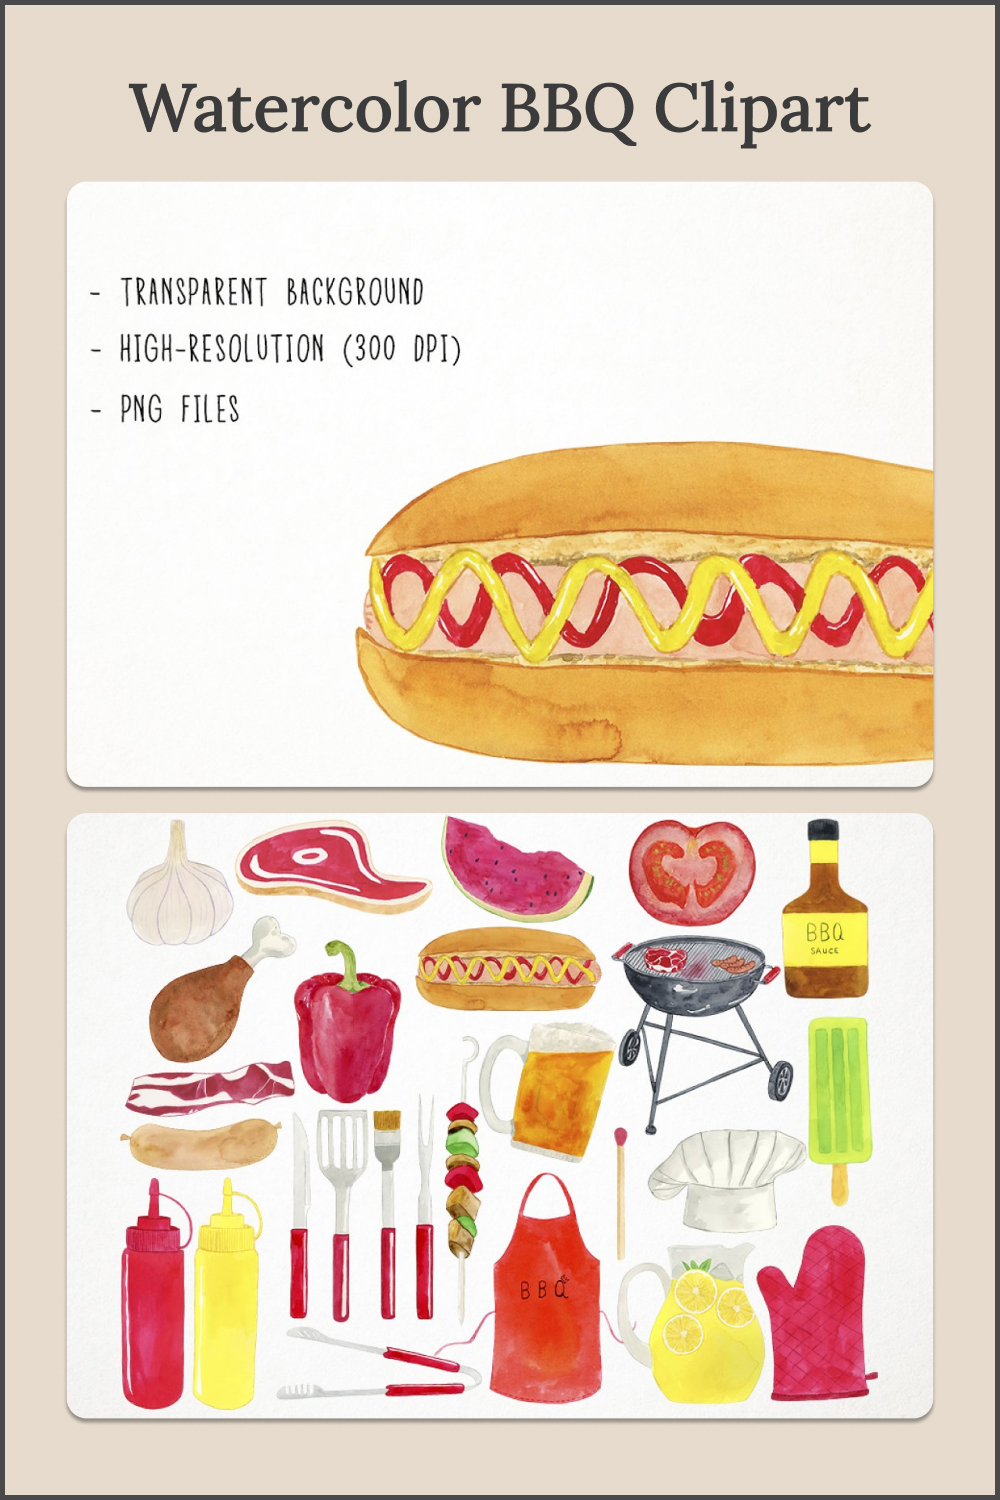 Watercolor bbq clipart of pinterest.